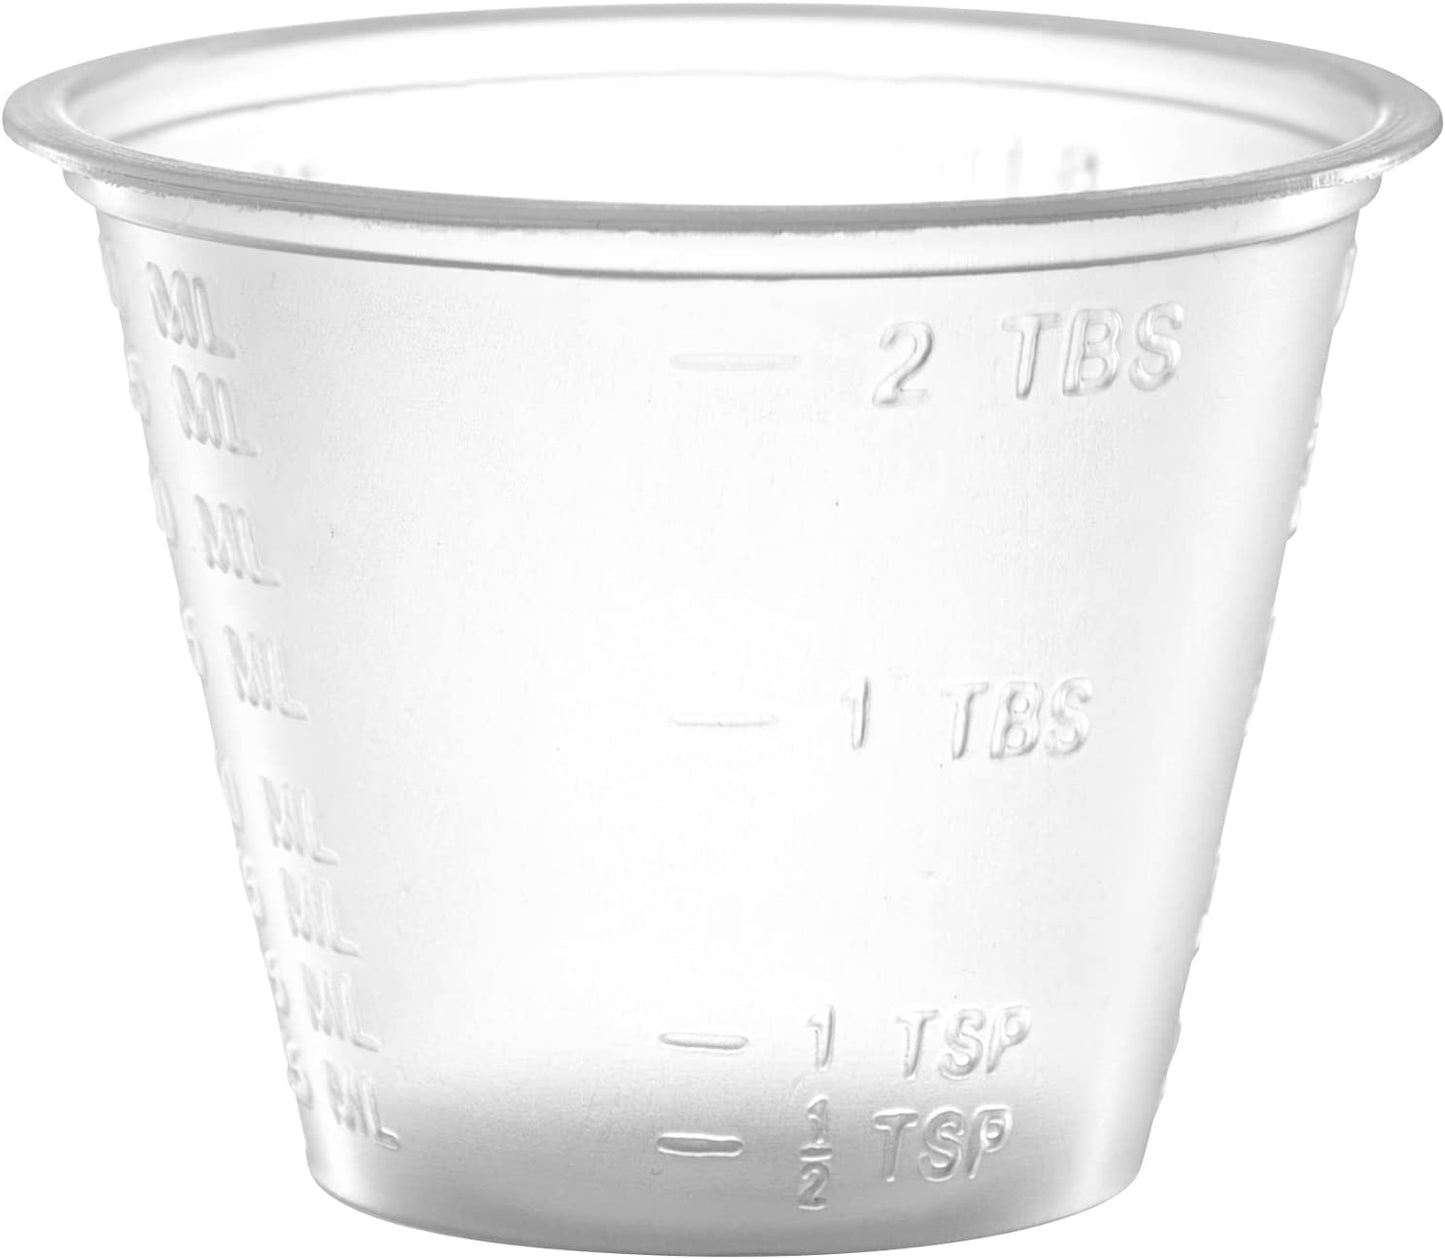 (100 Count 1Oz) Disposable Medicine Cups with Embossed Measurements Marking, for Liquid and Dry Medication, by Care Plus